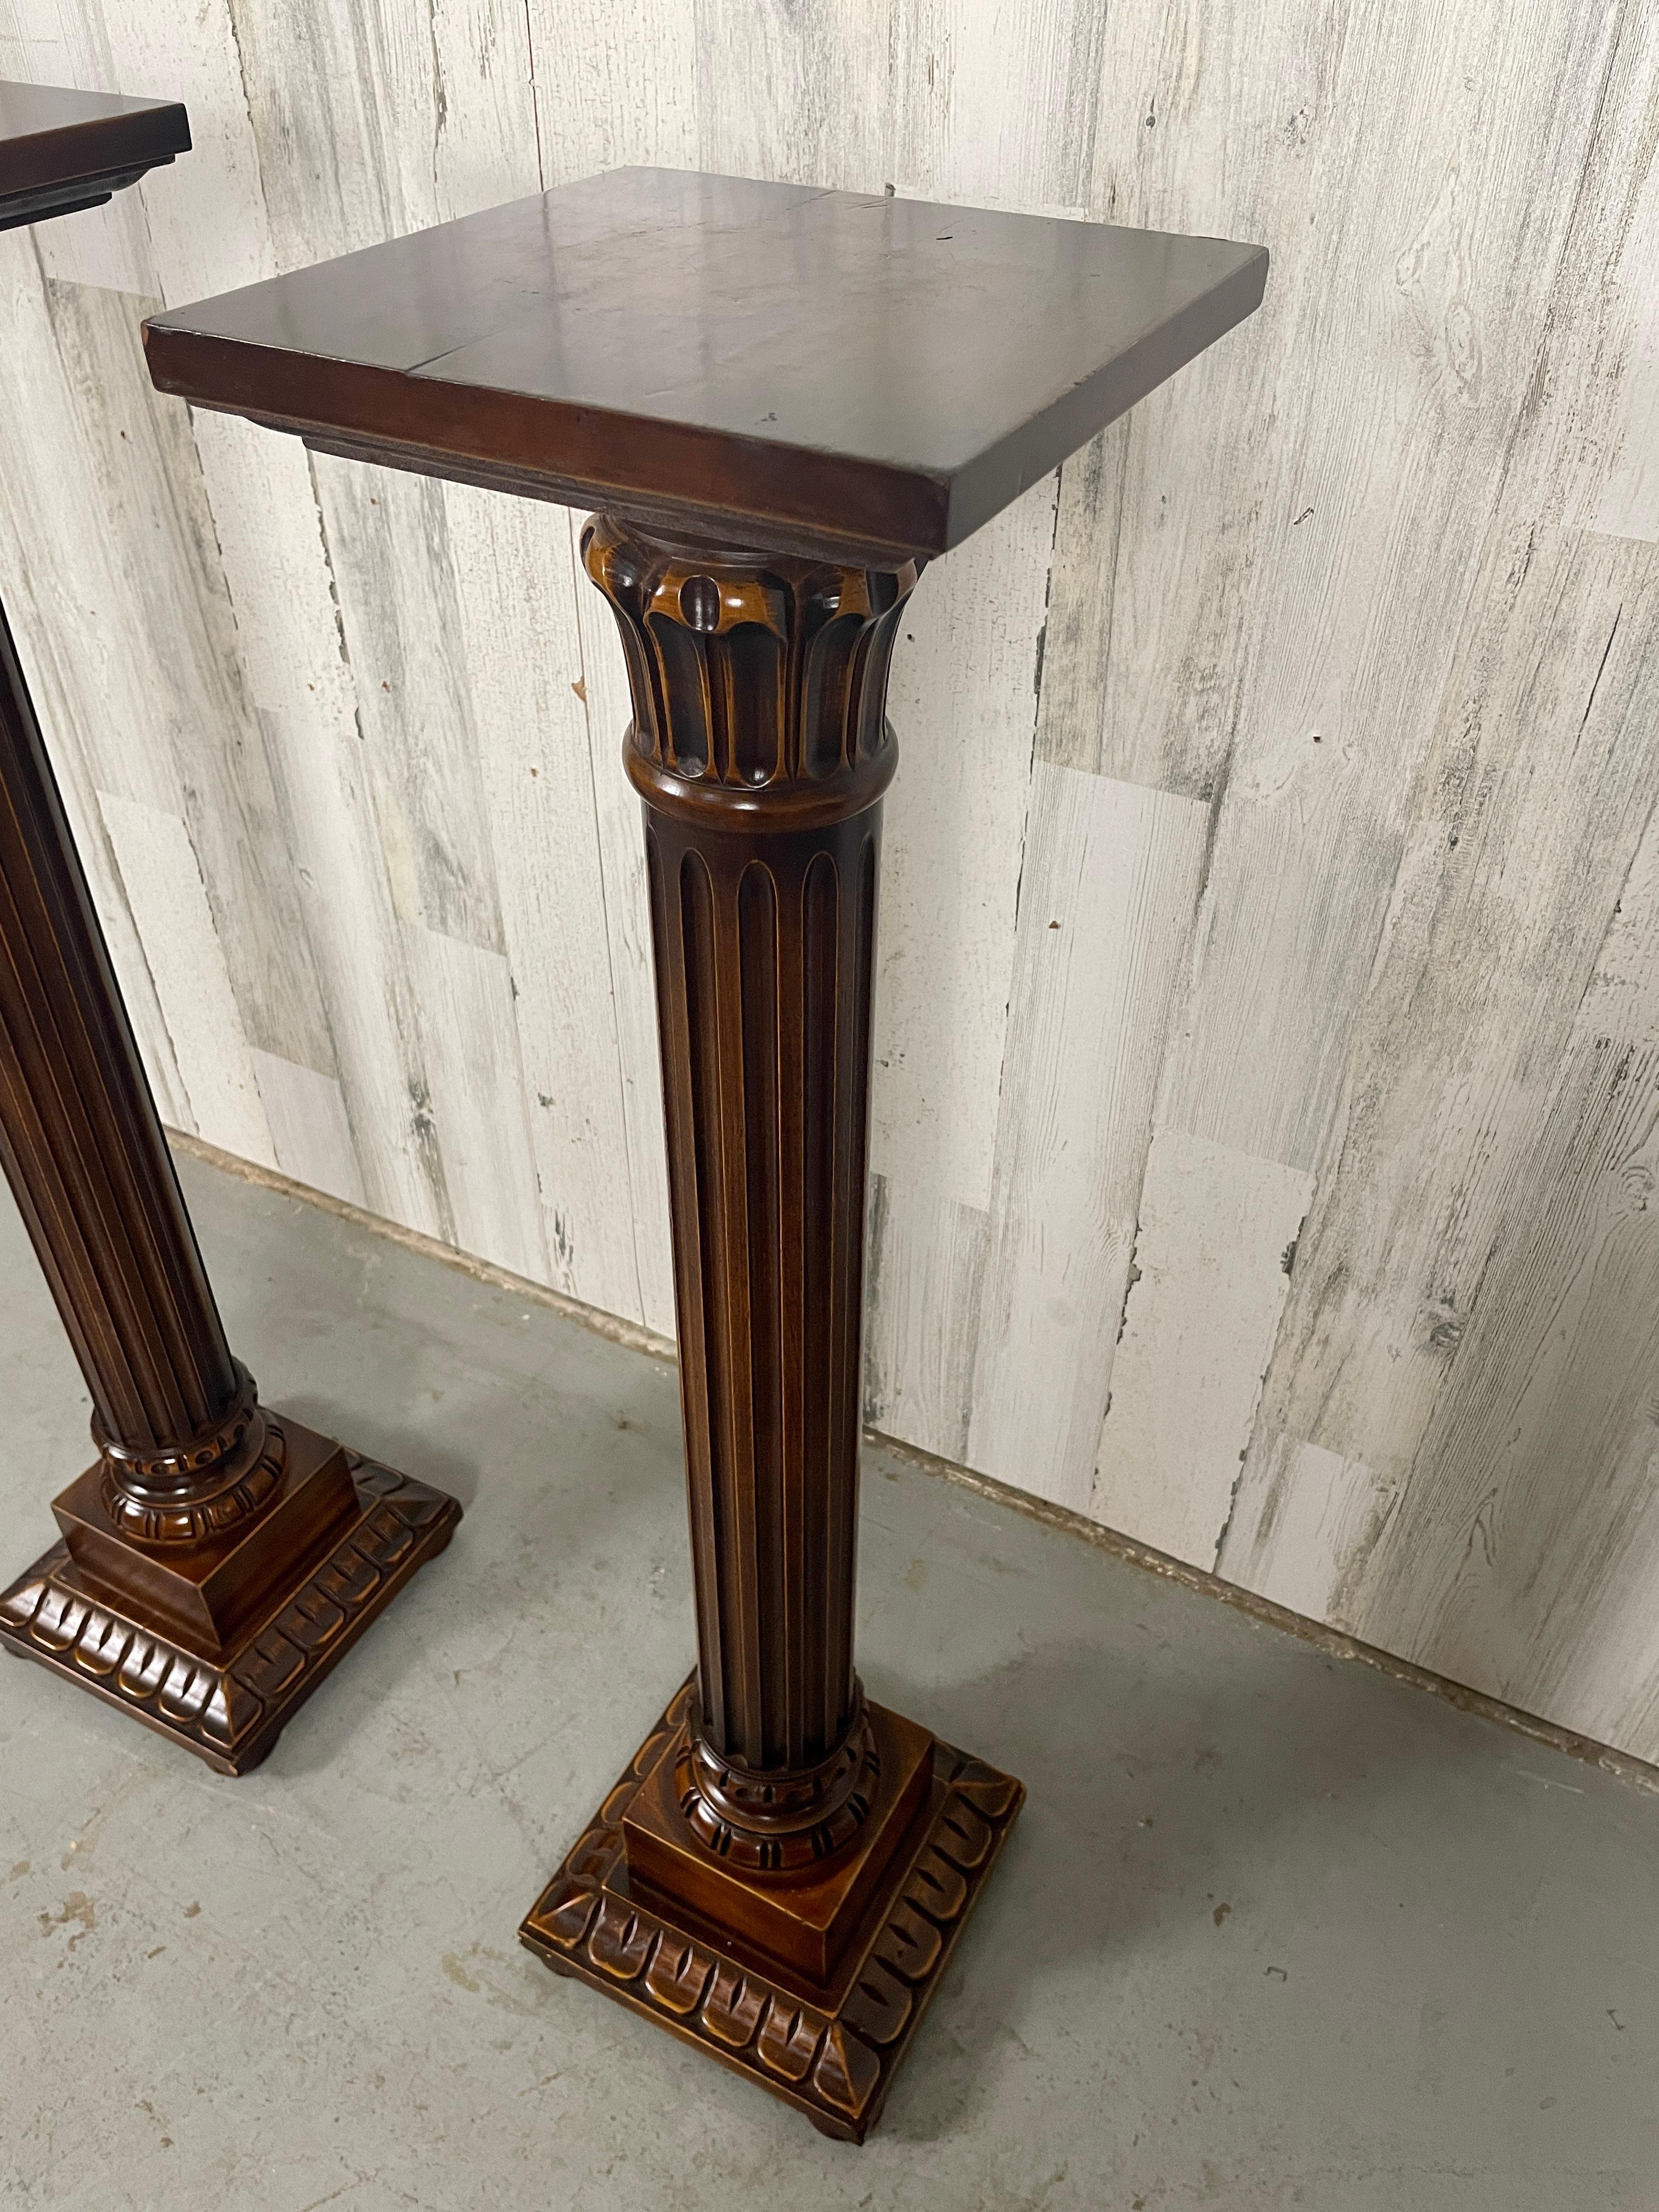 Vintage carved wood in the classical style with fluted columns topped with modified acanthus leaves carvings. Made in italy.